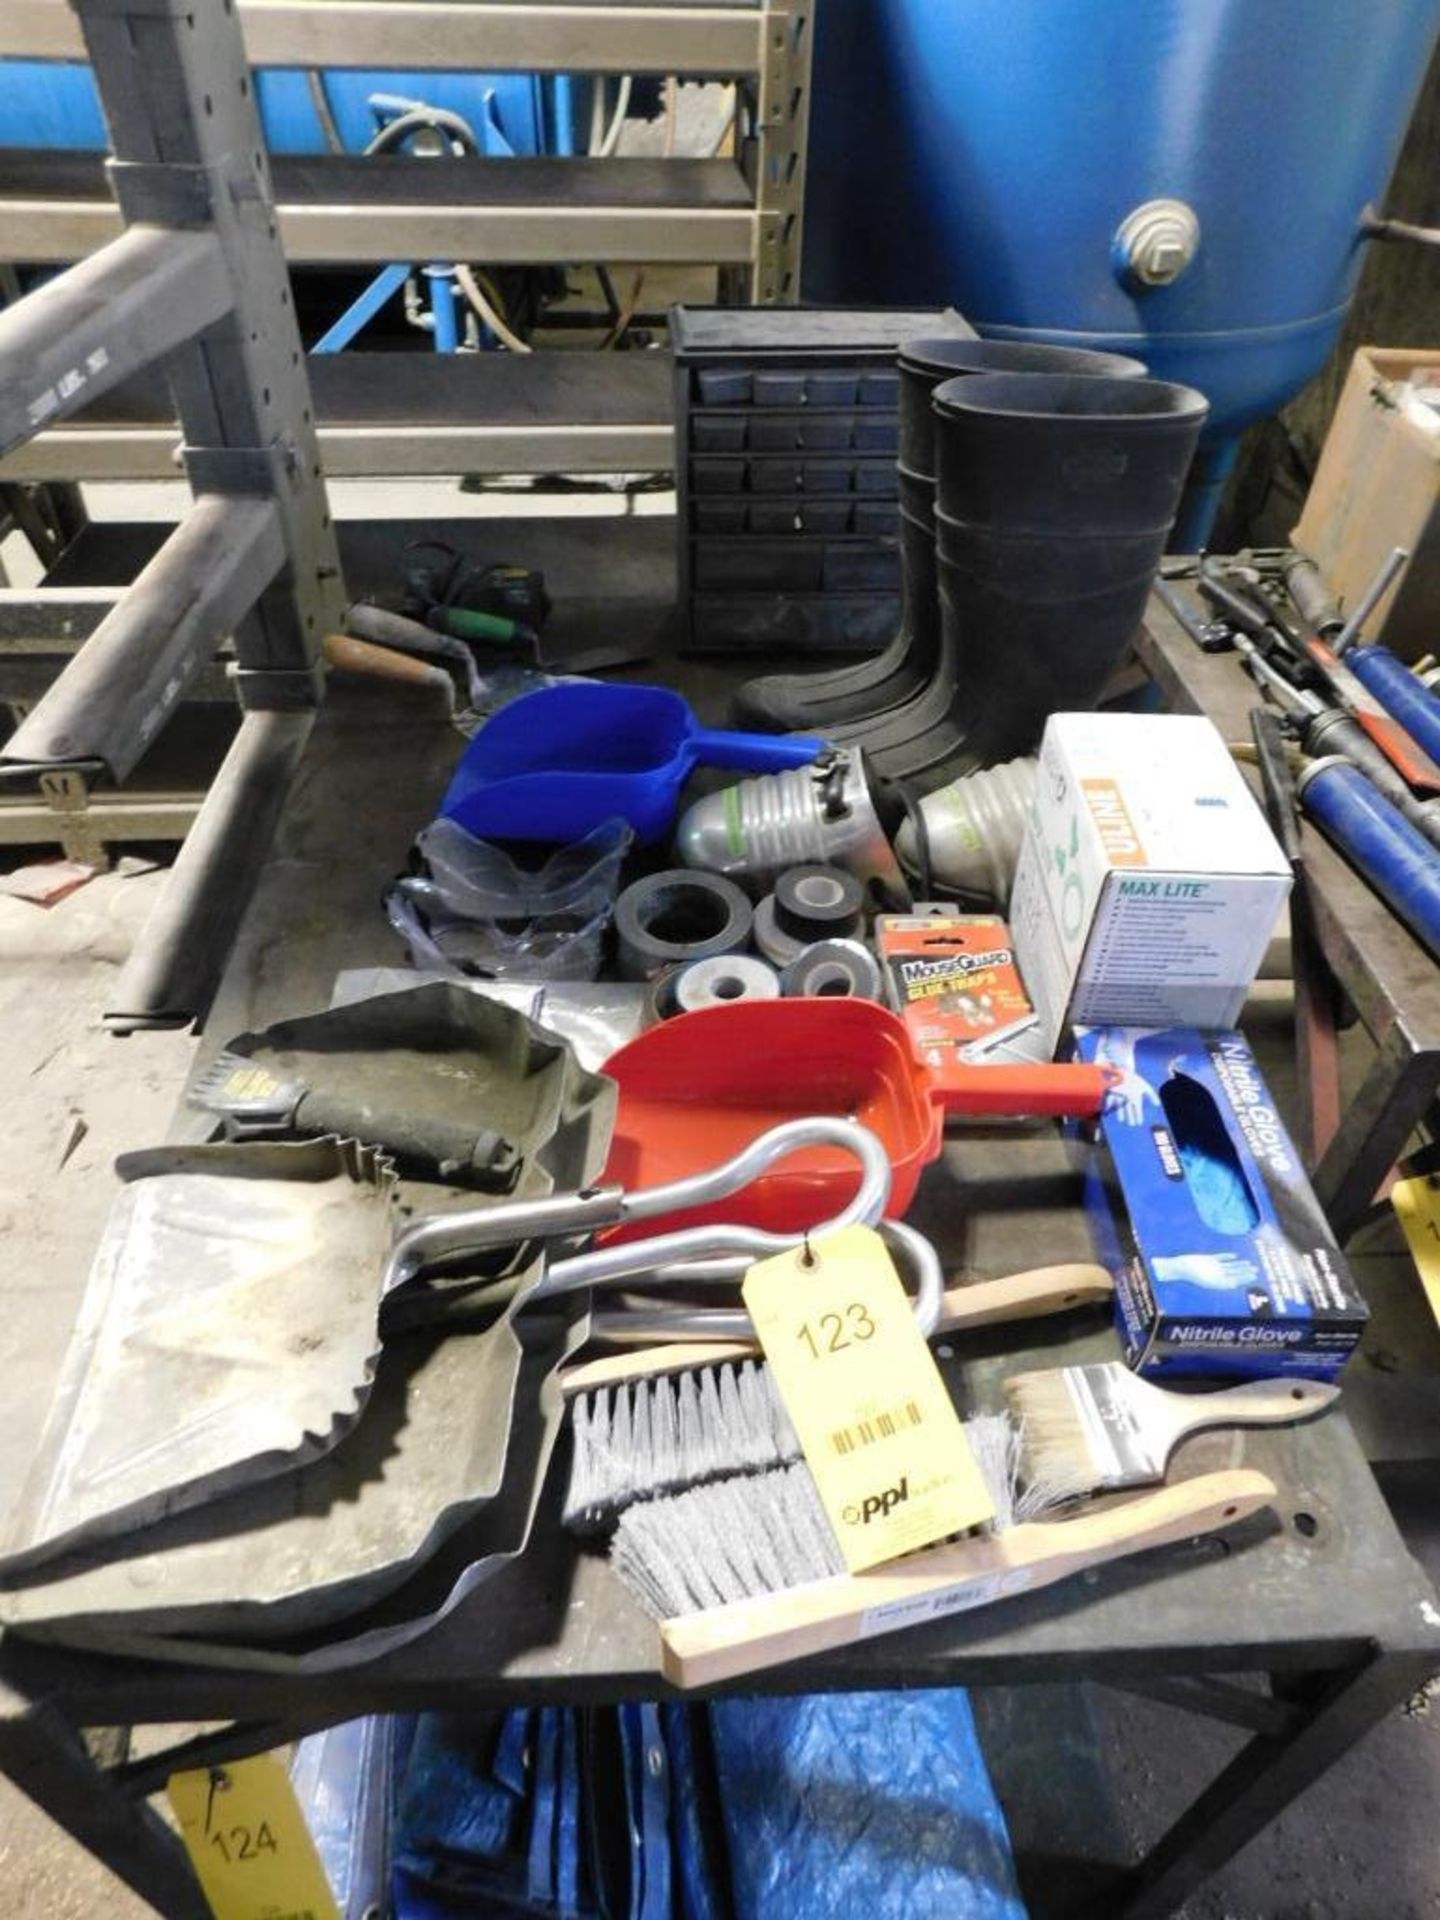 LOT: Contents of Cart including Assorted Tapes, Boots, Tarps, Goggles, Gloves, Pump, Dust Pans, Brus